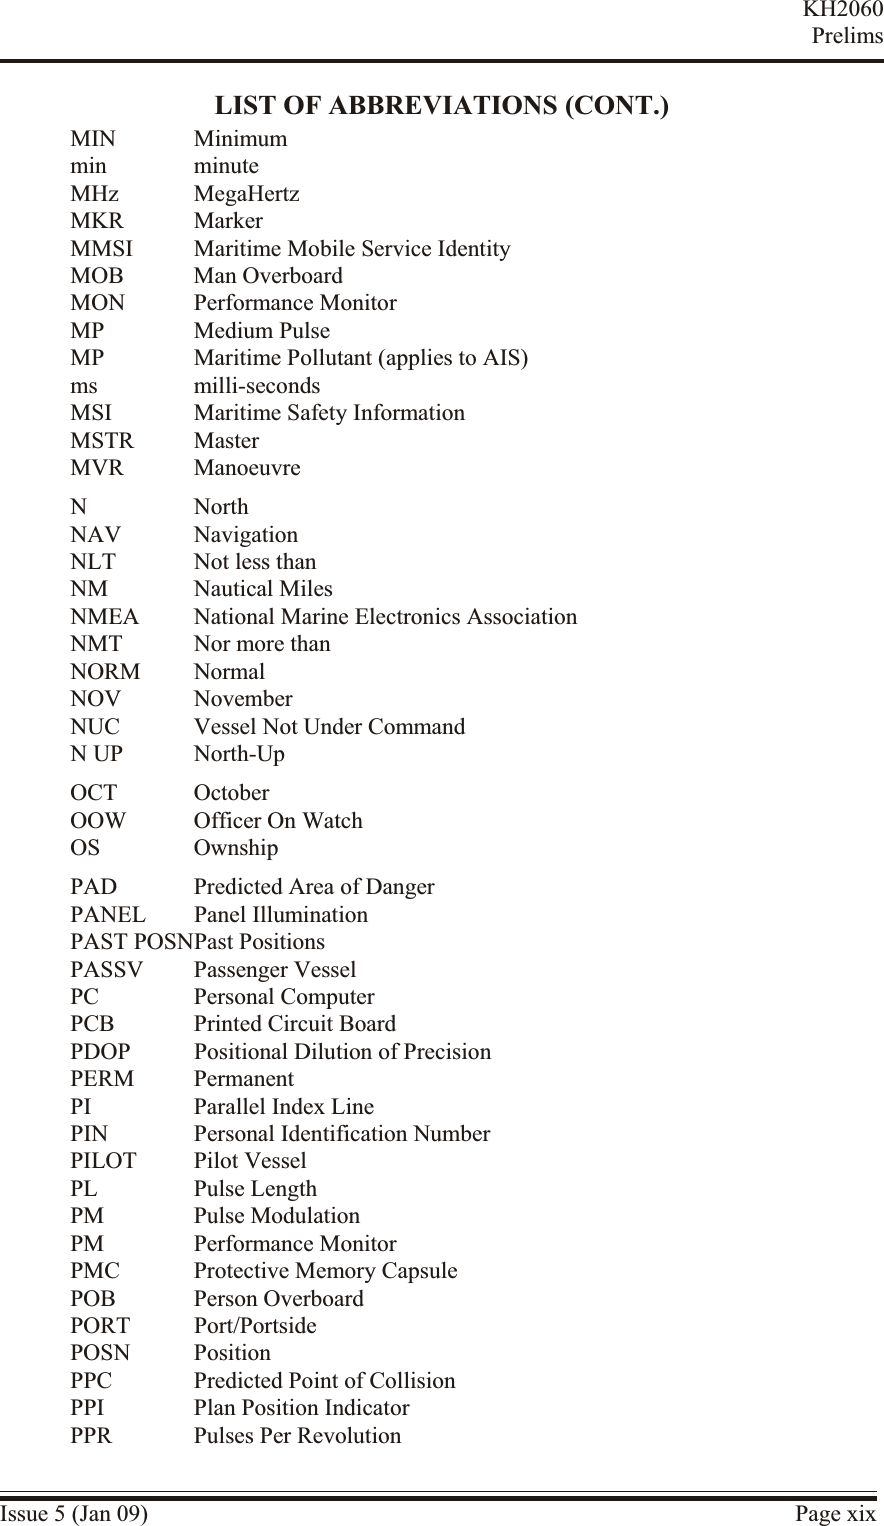 LIST OF ABBREVIATIONS (CONT.)MIN Minimummin minuteMHz MegaHertzMKR MarkerMMSI Maritime Mobile Service IdentityMOB Man OverboardMON Performance MonitorMP Medium PulseMP Maritime Pollutant (applies to AIS)ms milli-secondsMSI Maritime Safety InformationMSTR MasterMVR ManoeuvreN NorthNAV NavigationNLT Not less thanNM Nautical MilesNMEA National Marine Electronics AssociationNMT Nor more thanNORM NormalNOV NovemberNUC Vessel Not Under CommandN UP North-UpOCT OctoberOOW Officer On WatchOS OwnshipPAD Predicted Area of DangerPANEL Panel IlluminationPAST POSNPast PositionsPASSV Passenger VesselPC Personal ComputerPCB Printed Circuit BoardPDOP Positional Dilution of PrecisionPERM PermanentPI Parallel Index LinePIN Personal Identification NumberPILOT Pilot VesselPL Pulse LengthPM Pulse ModulationPM Performance MonitorPMC Protective Memory CapsulePOB Person OverboardPORT Port/PortsidePOSN PositionPPC Predicted Point of CollisionPPI Plan Position IndicatorPPR Pulses Per RevolutionIssue 5 (Jan 09) Page xixKH2060Prelims